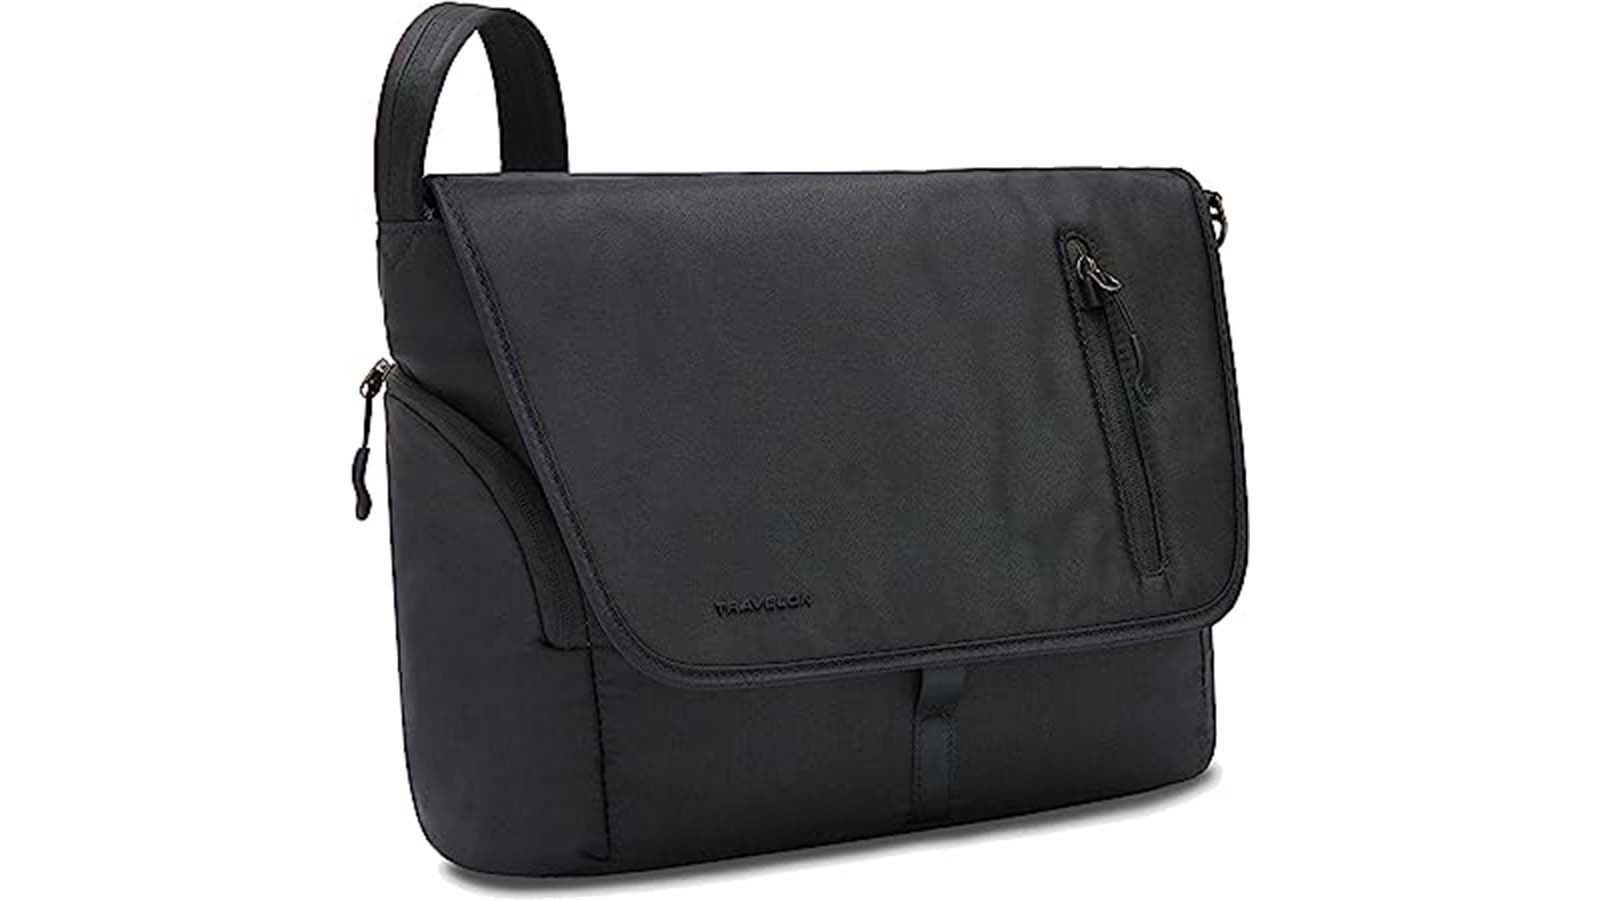 TIDING Men Sling Bag Anti Theft Crossbody Chest Bag Genuine Leather  Shoulder Bag fit 11 inch Tablet for Outdoor Sport Daily Bags